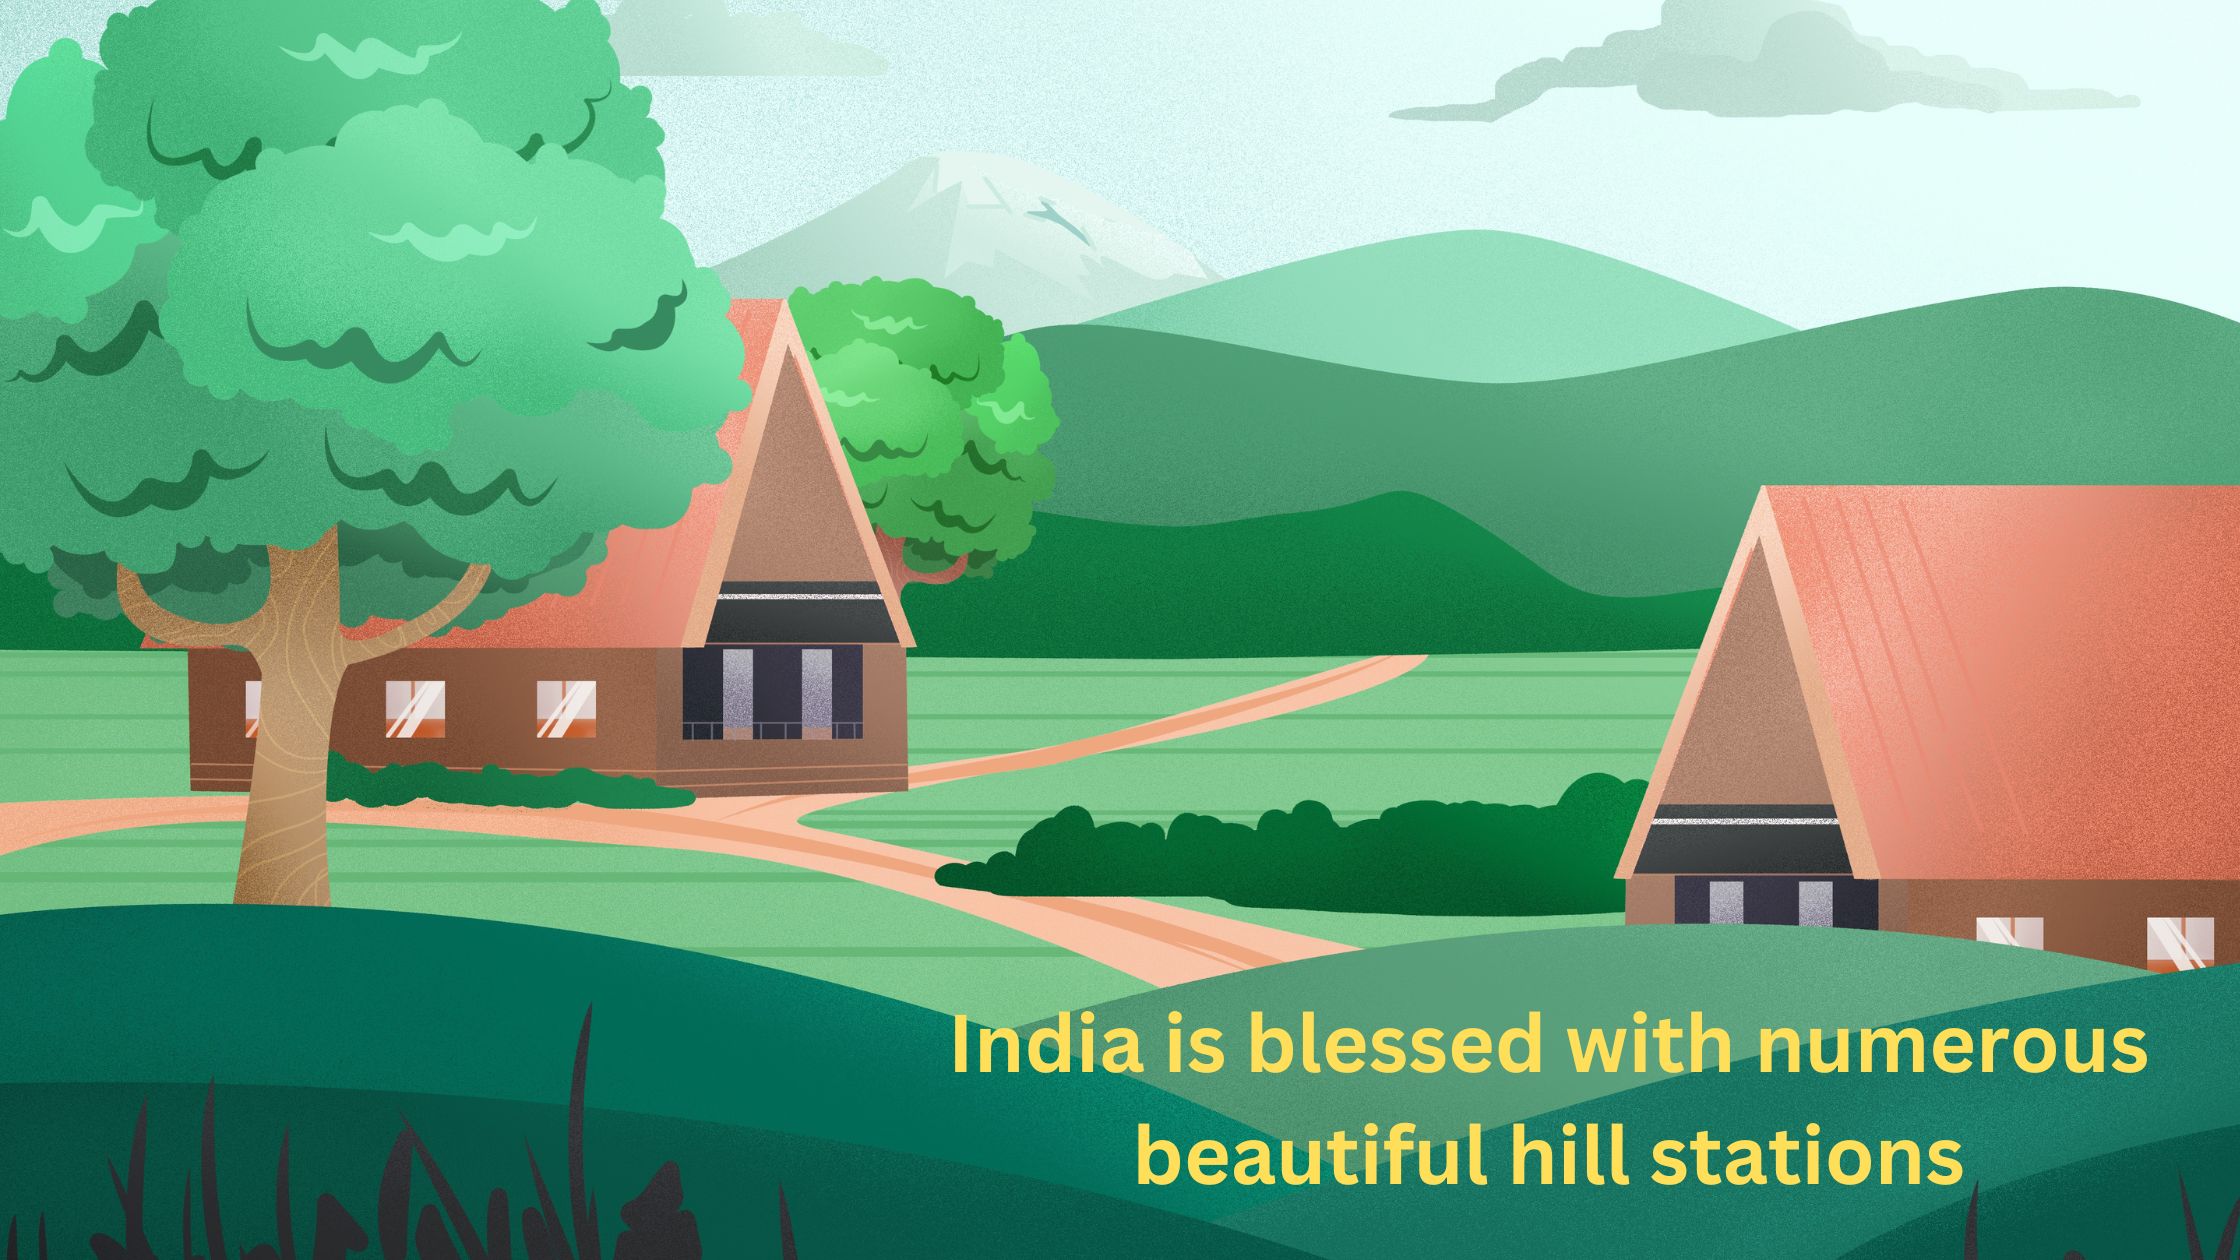 India is blessed with numerous beautiful hill stations